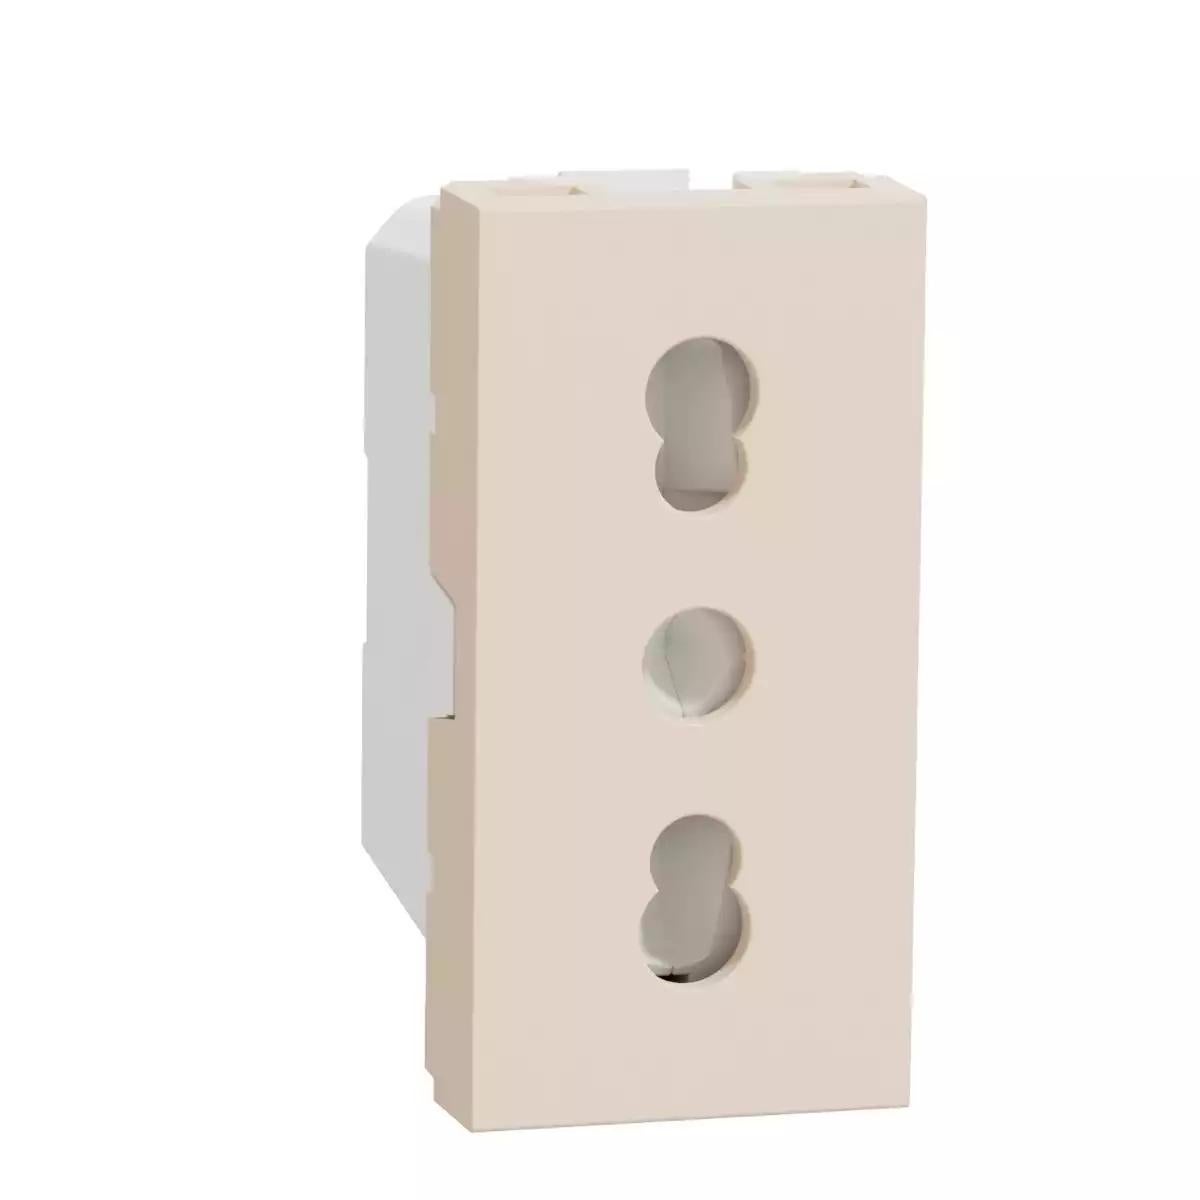 Socket-outlet, New Unica, mechanism, 2P + E, 16A, Italian, with shutter, glossy, untreated, beige